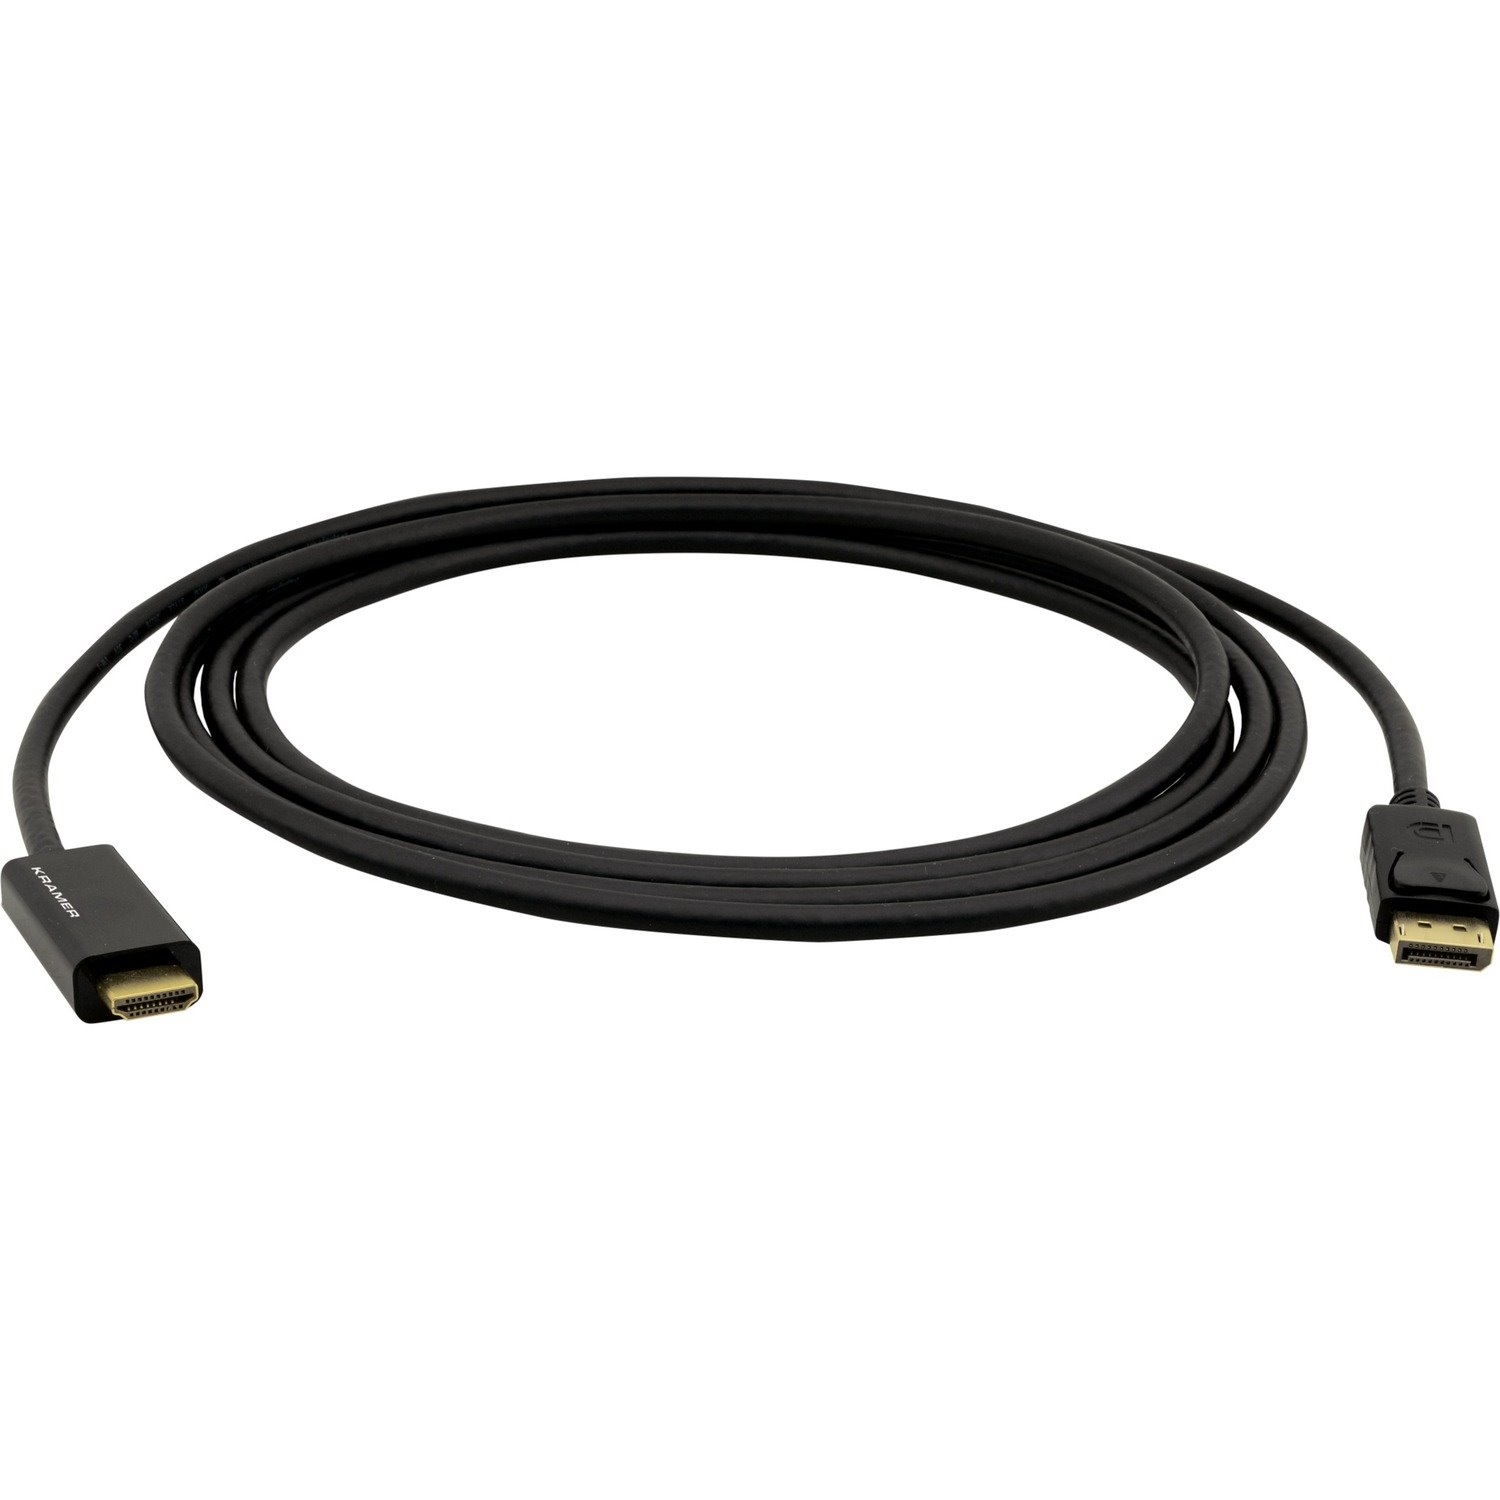 Kramer C-DPM/HM/UHD-10 3.05 m DisplayPort/HDMI A/V Cable for Computer, Notebook, Audio/Video Device